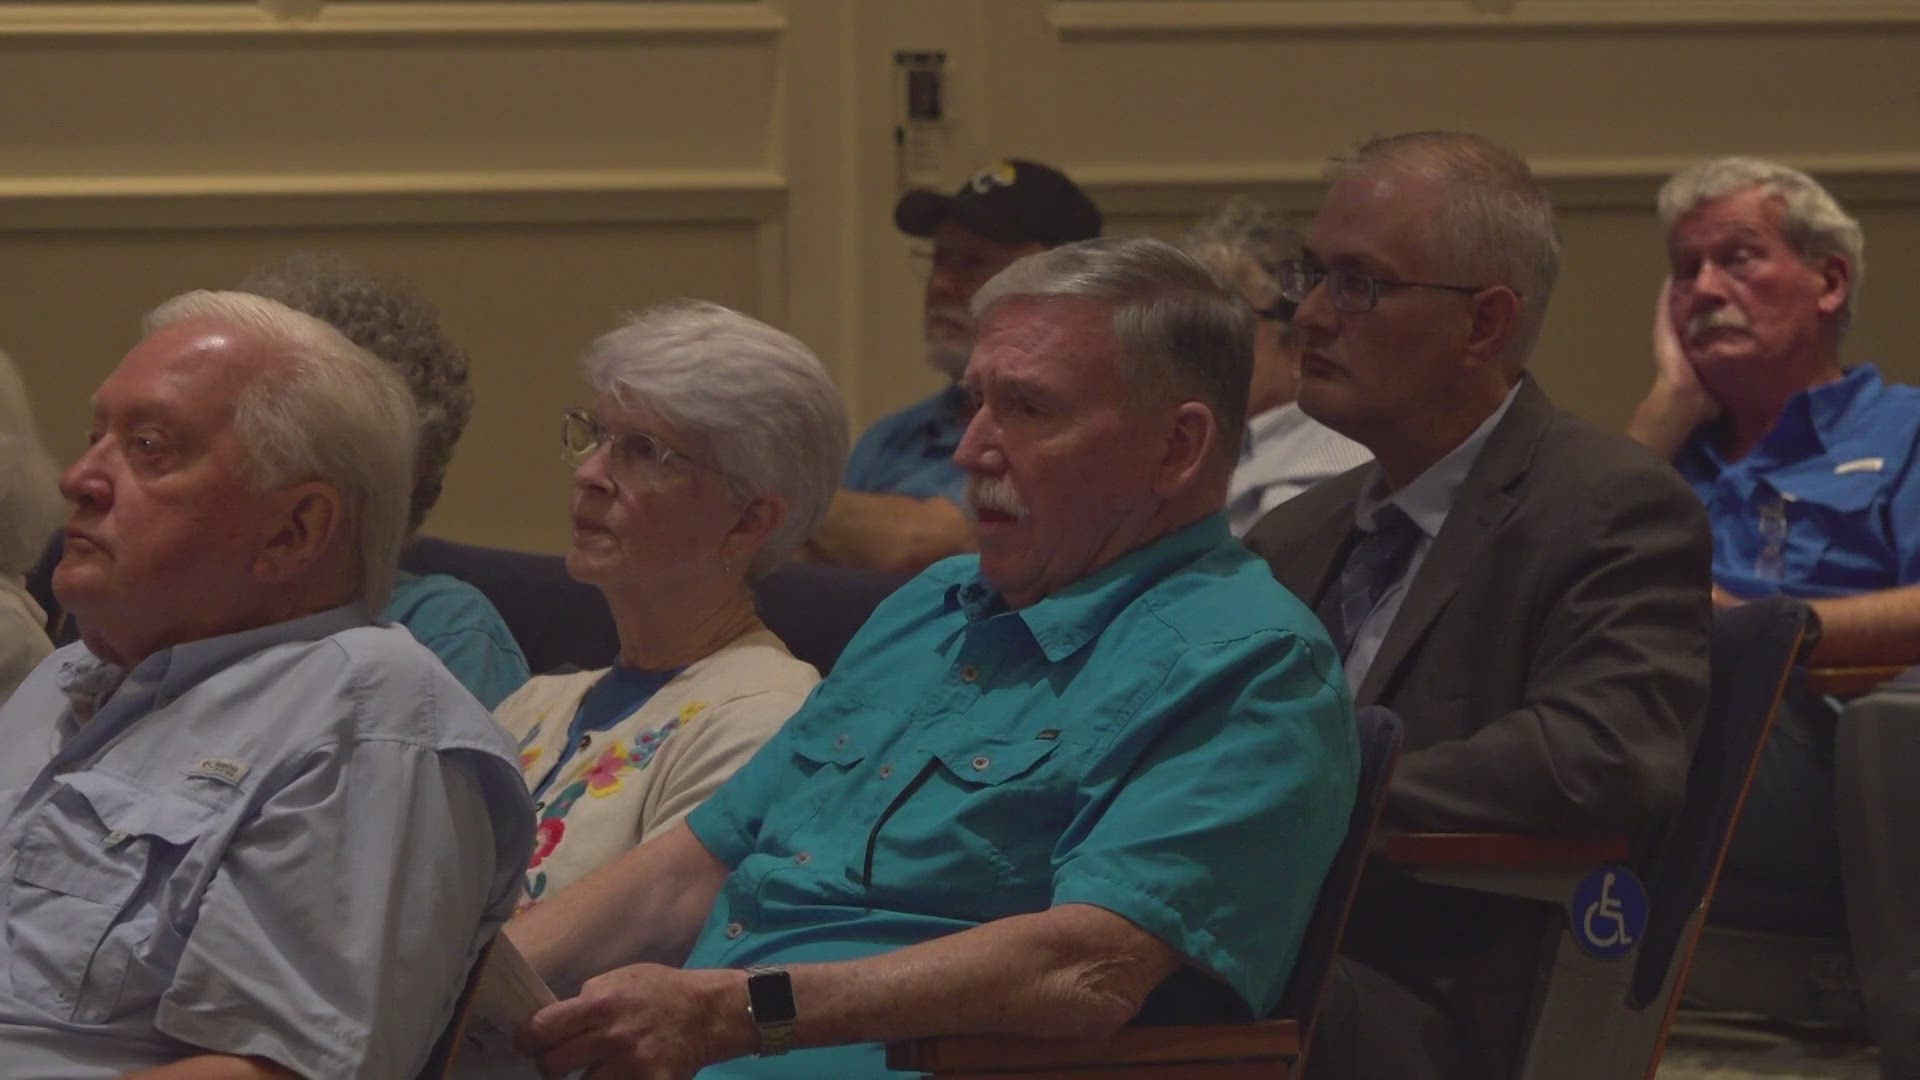 One neighbor said she was shaking with anger at Tuesday's meeting after a flub by the city's traffic department derailed a decision on the controversial project.